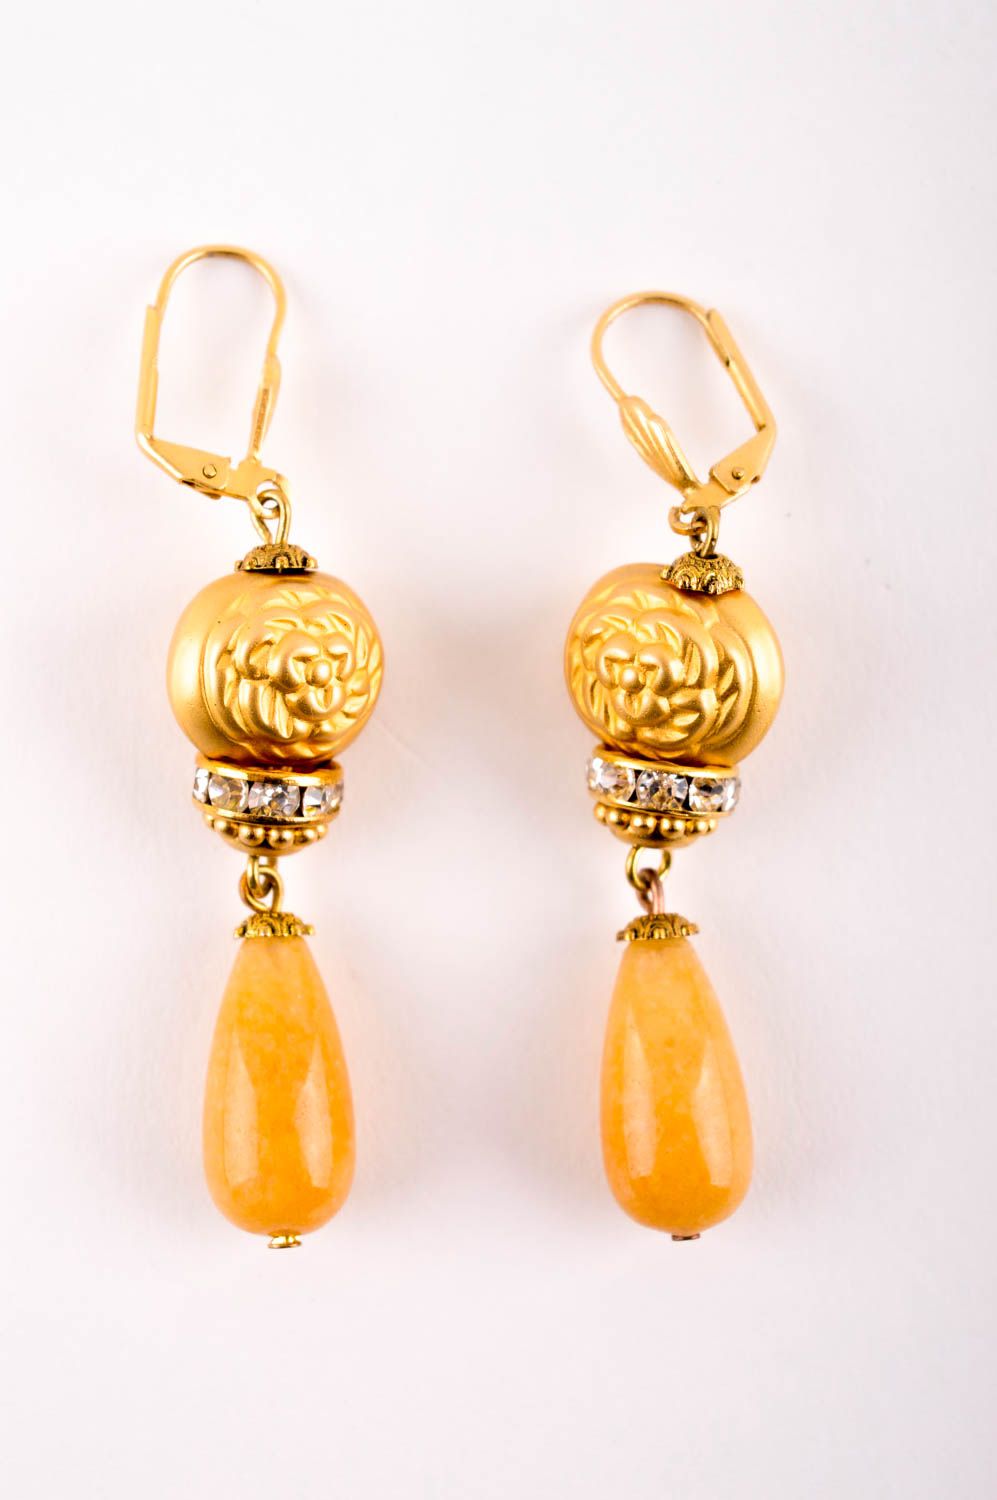 Earrings with natural stones handmade earrings with charms evening accessories photo 3